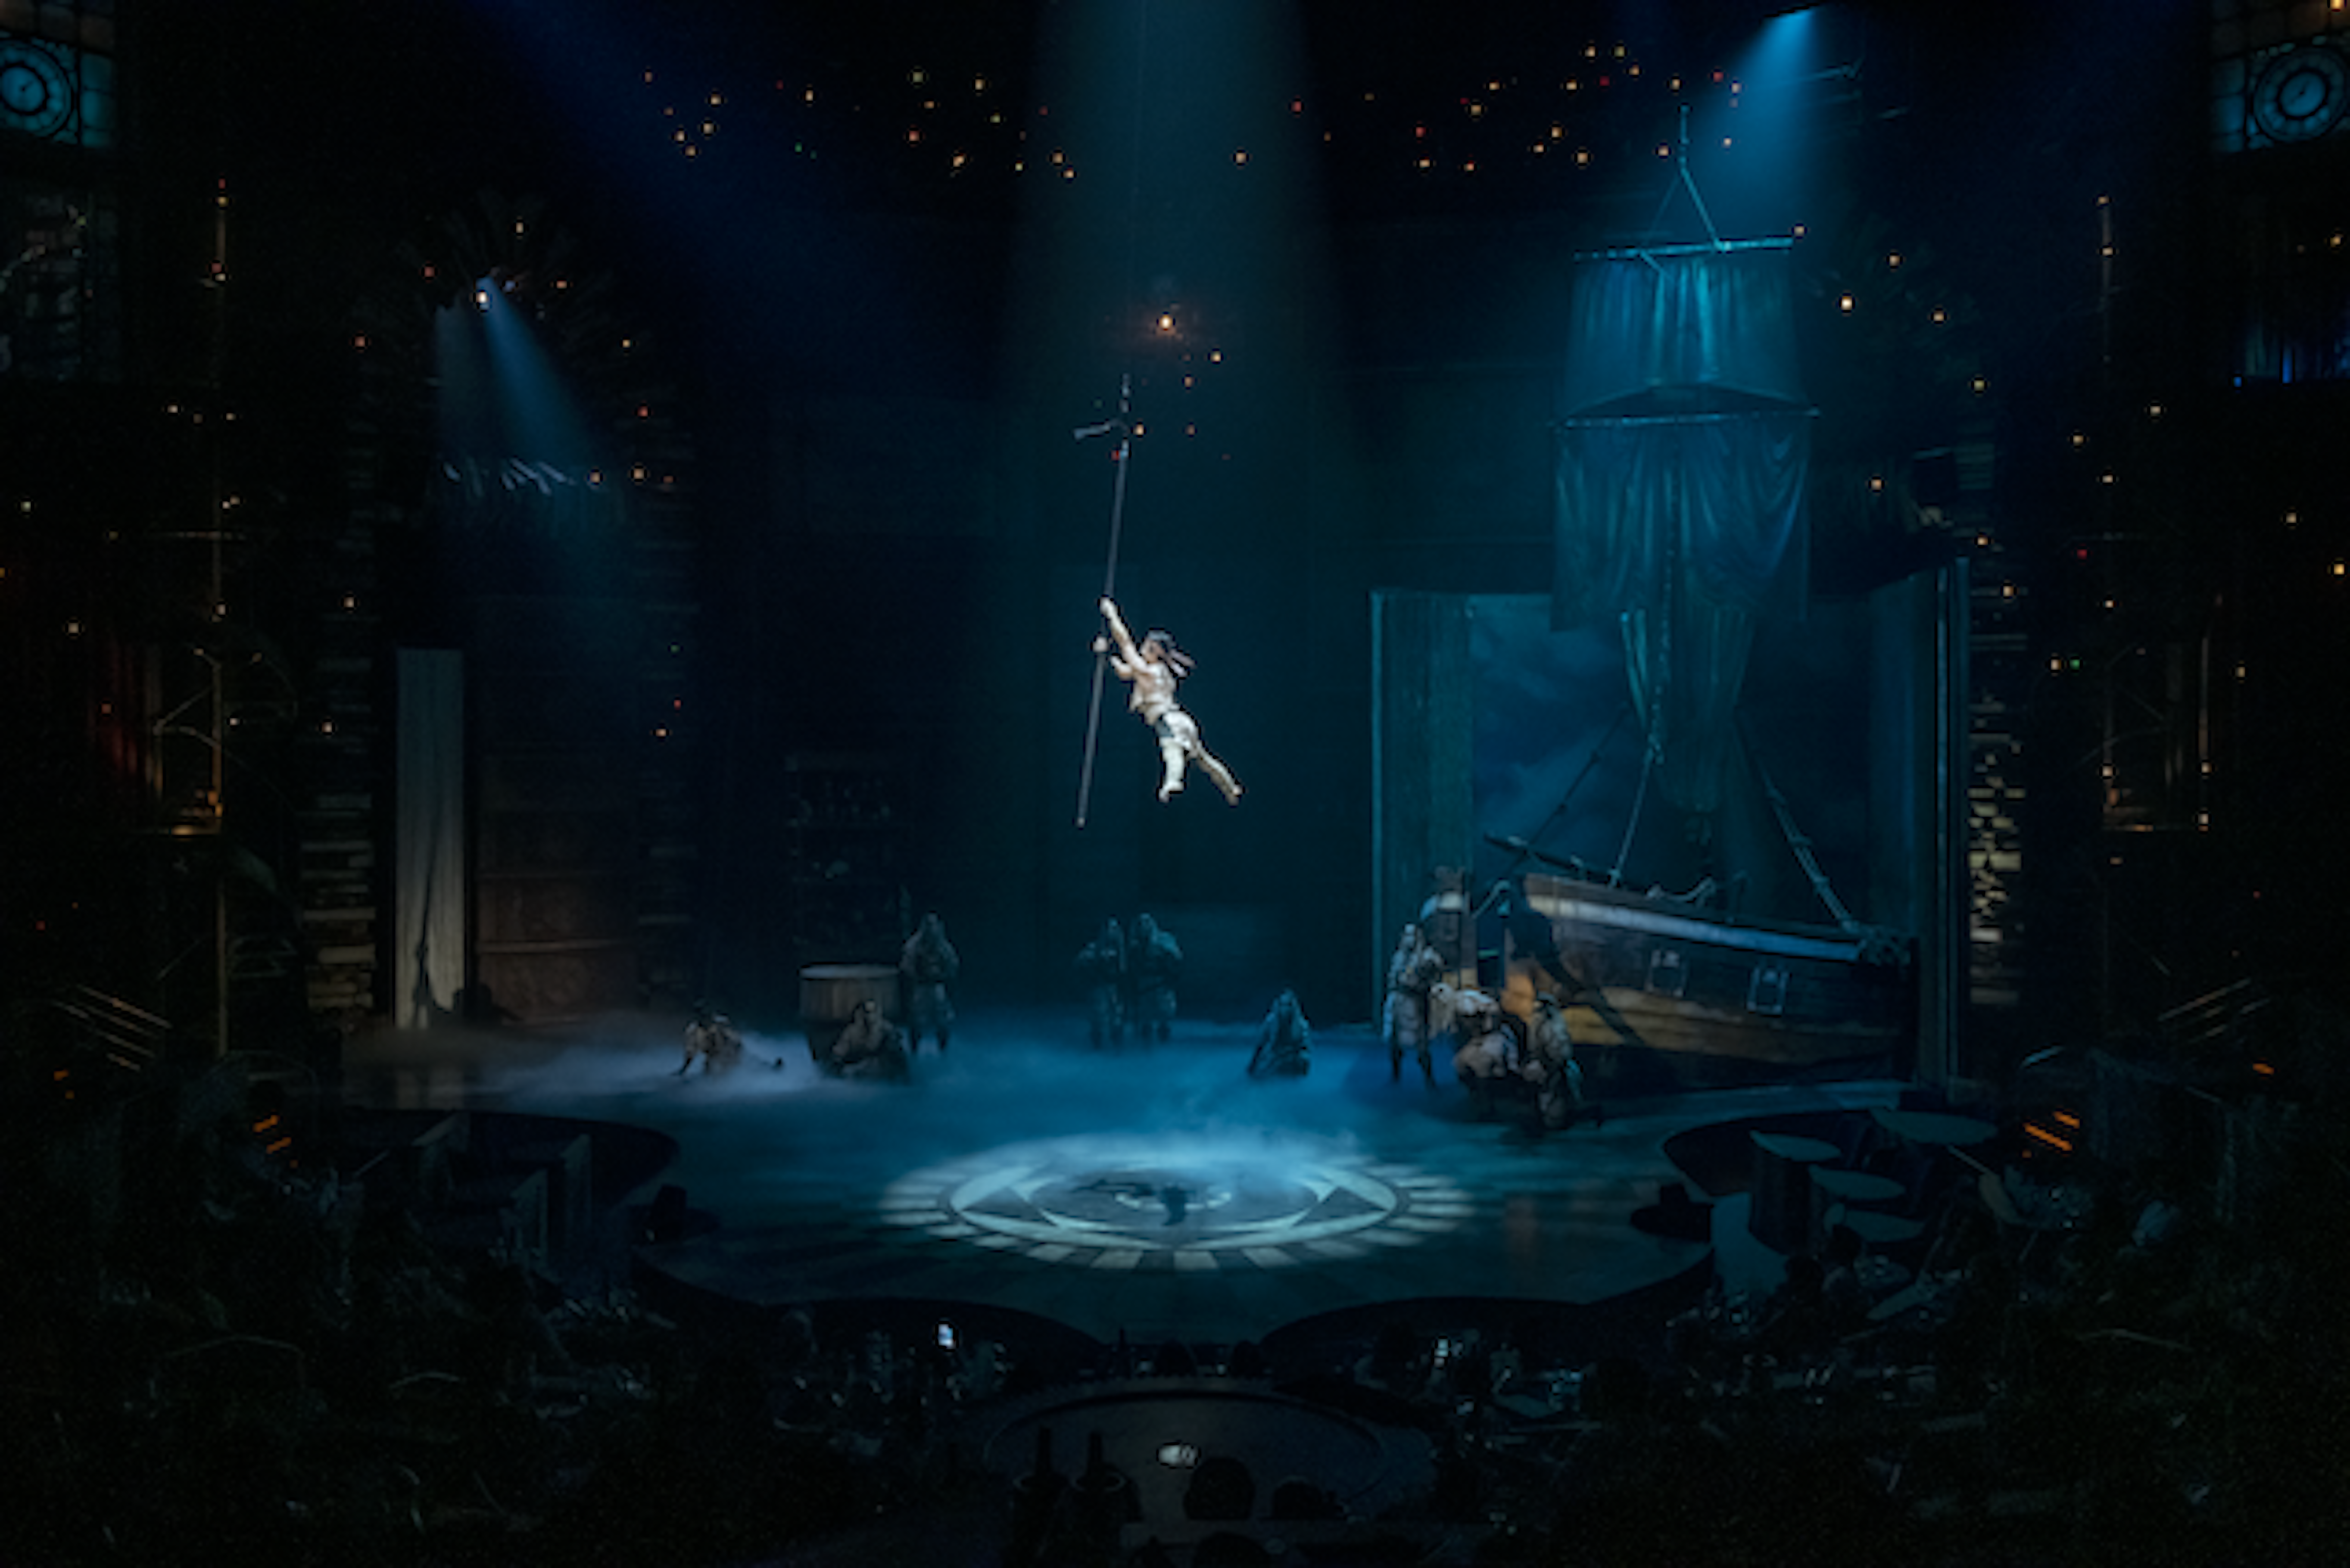 Cirque du Soleil JOYÀ debuts a must-see flying pole act in celebration of its 10th season